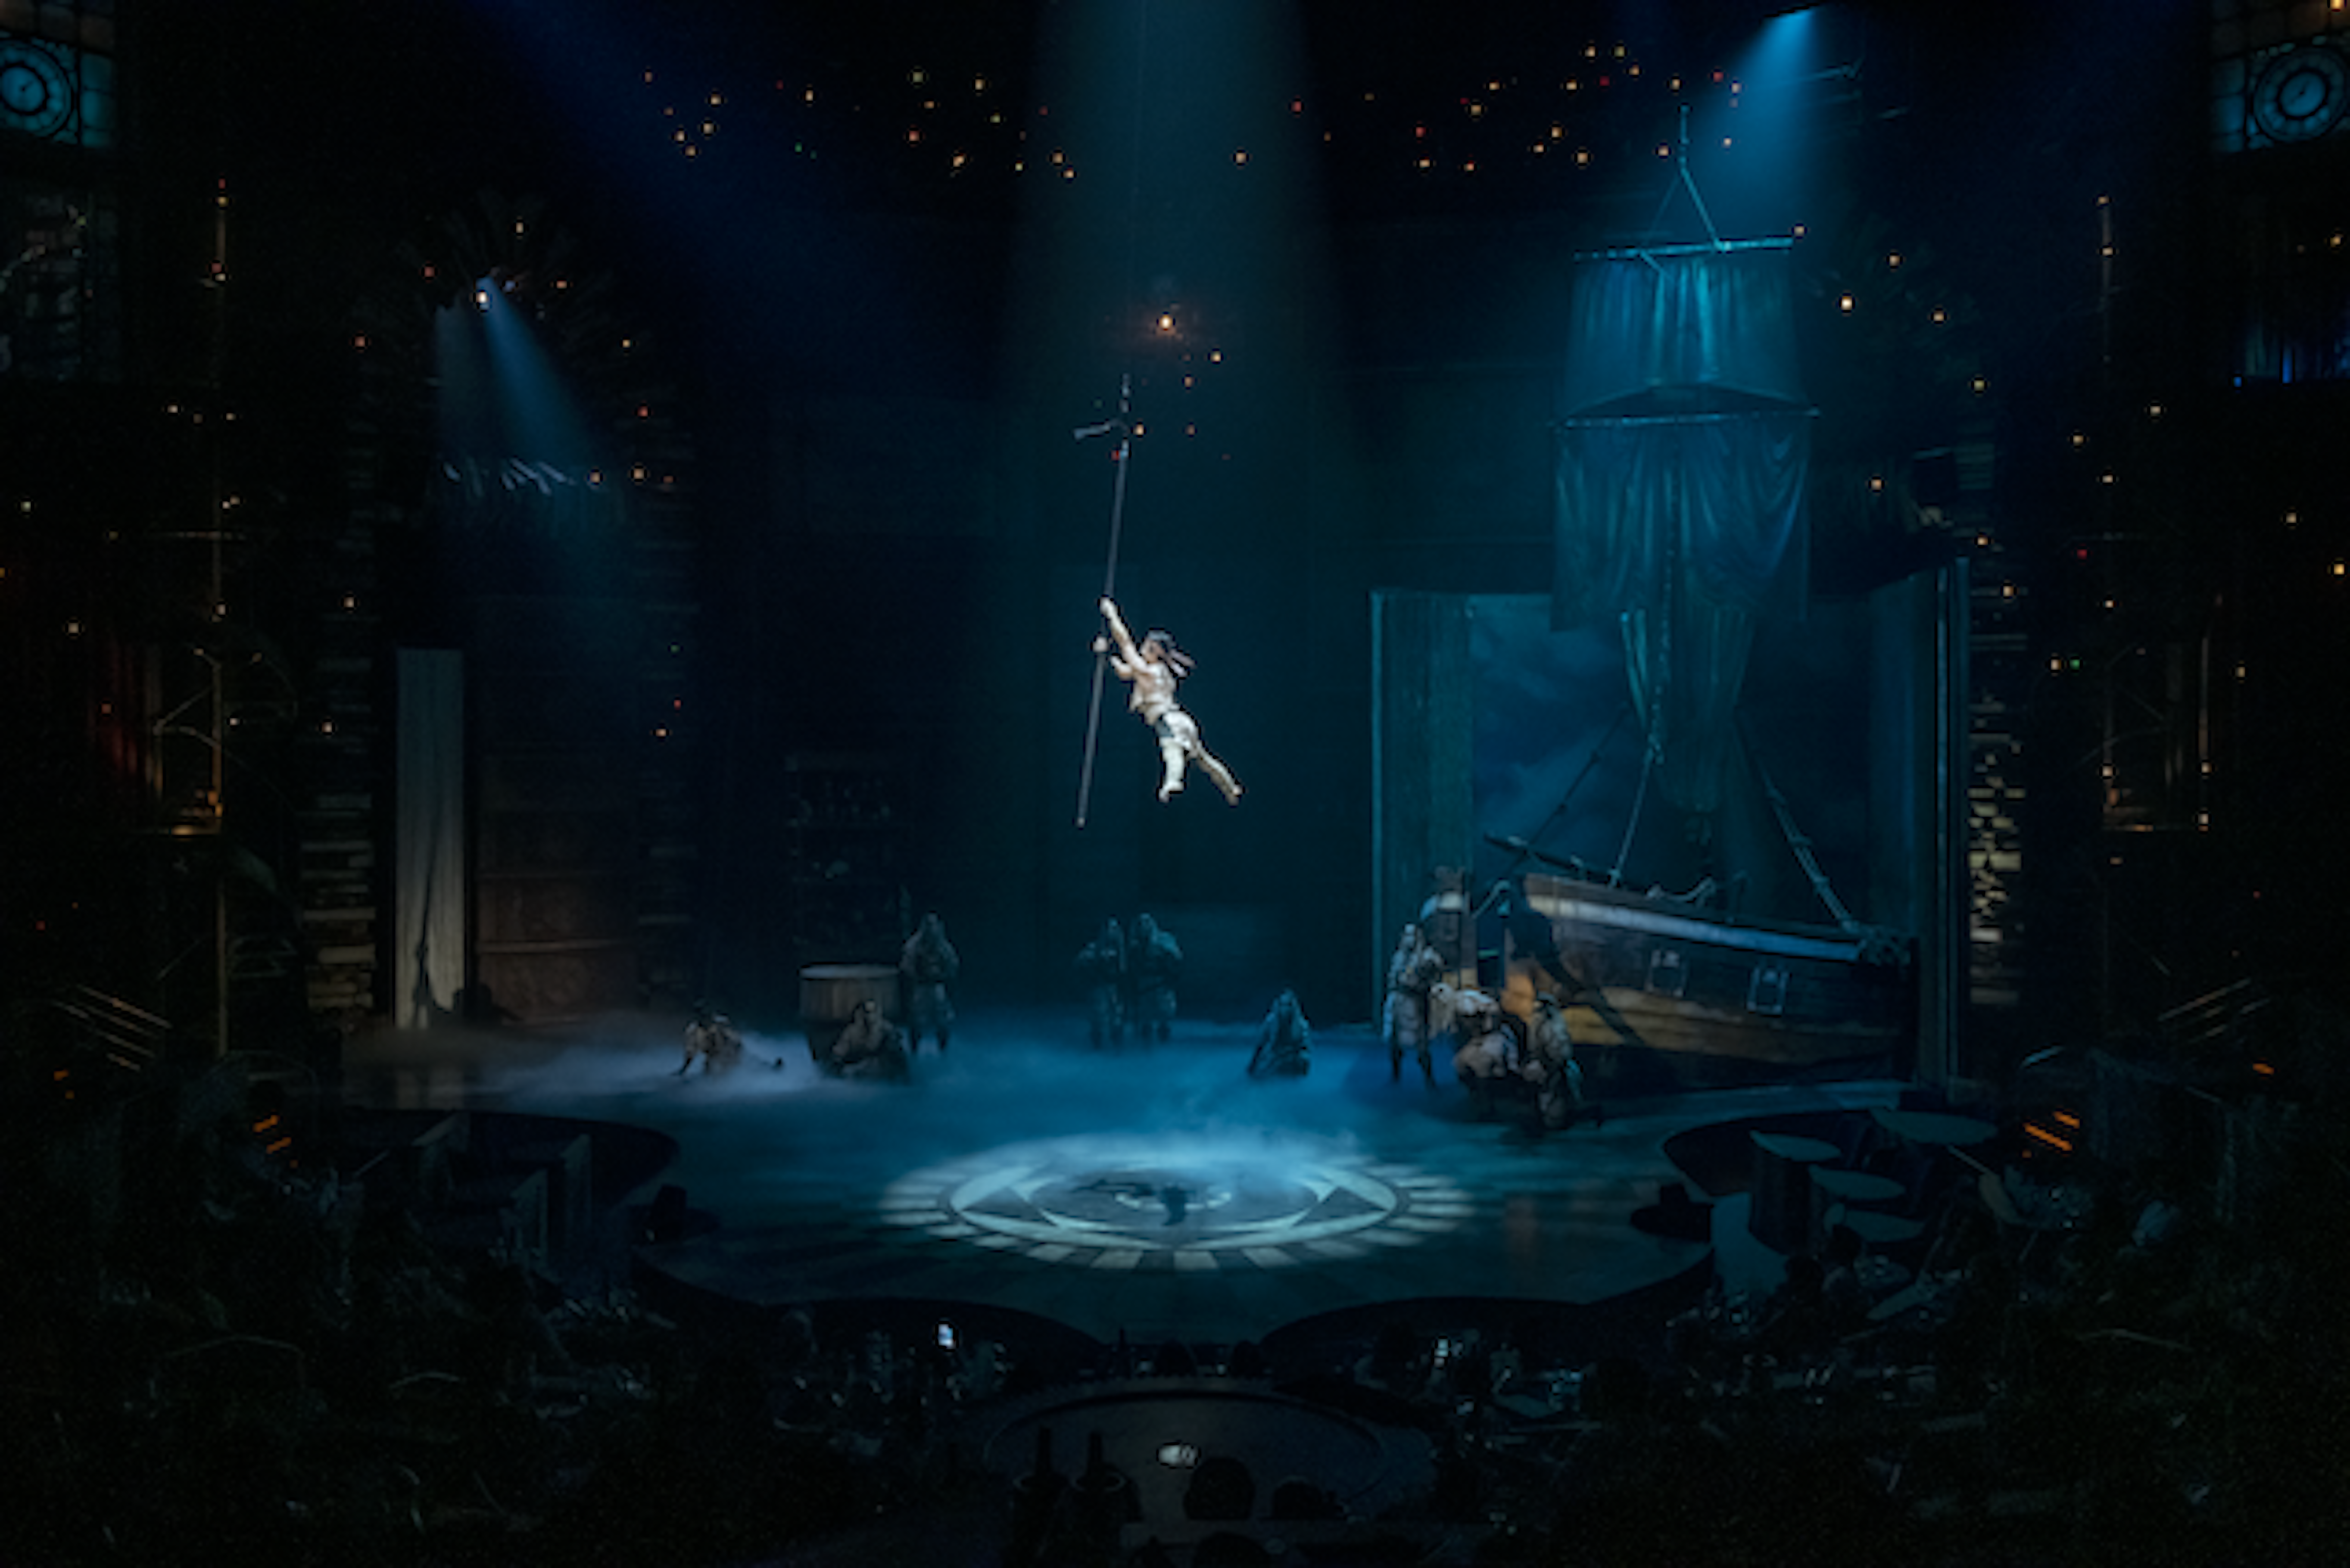 Cirque du Soleil JOYÀ debuts a must-see flying pole act in celebration of its 10th season